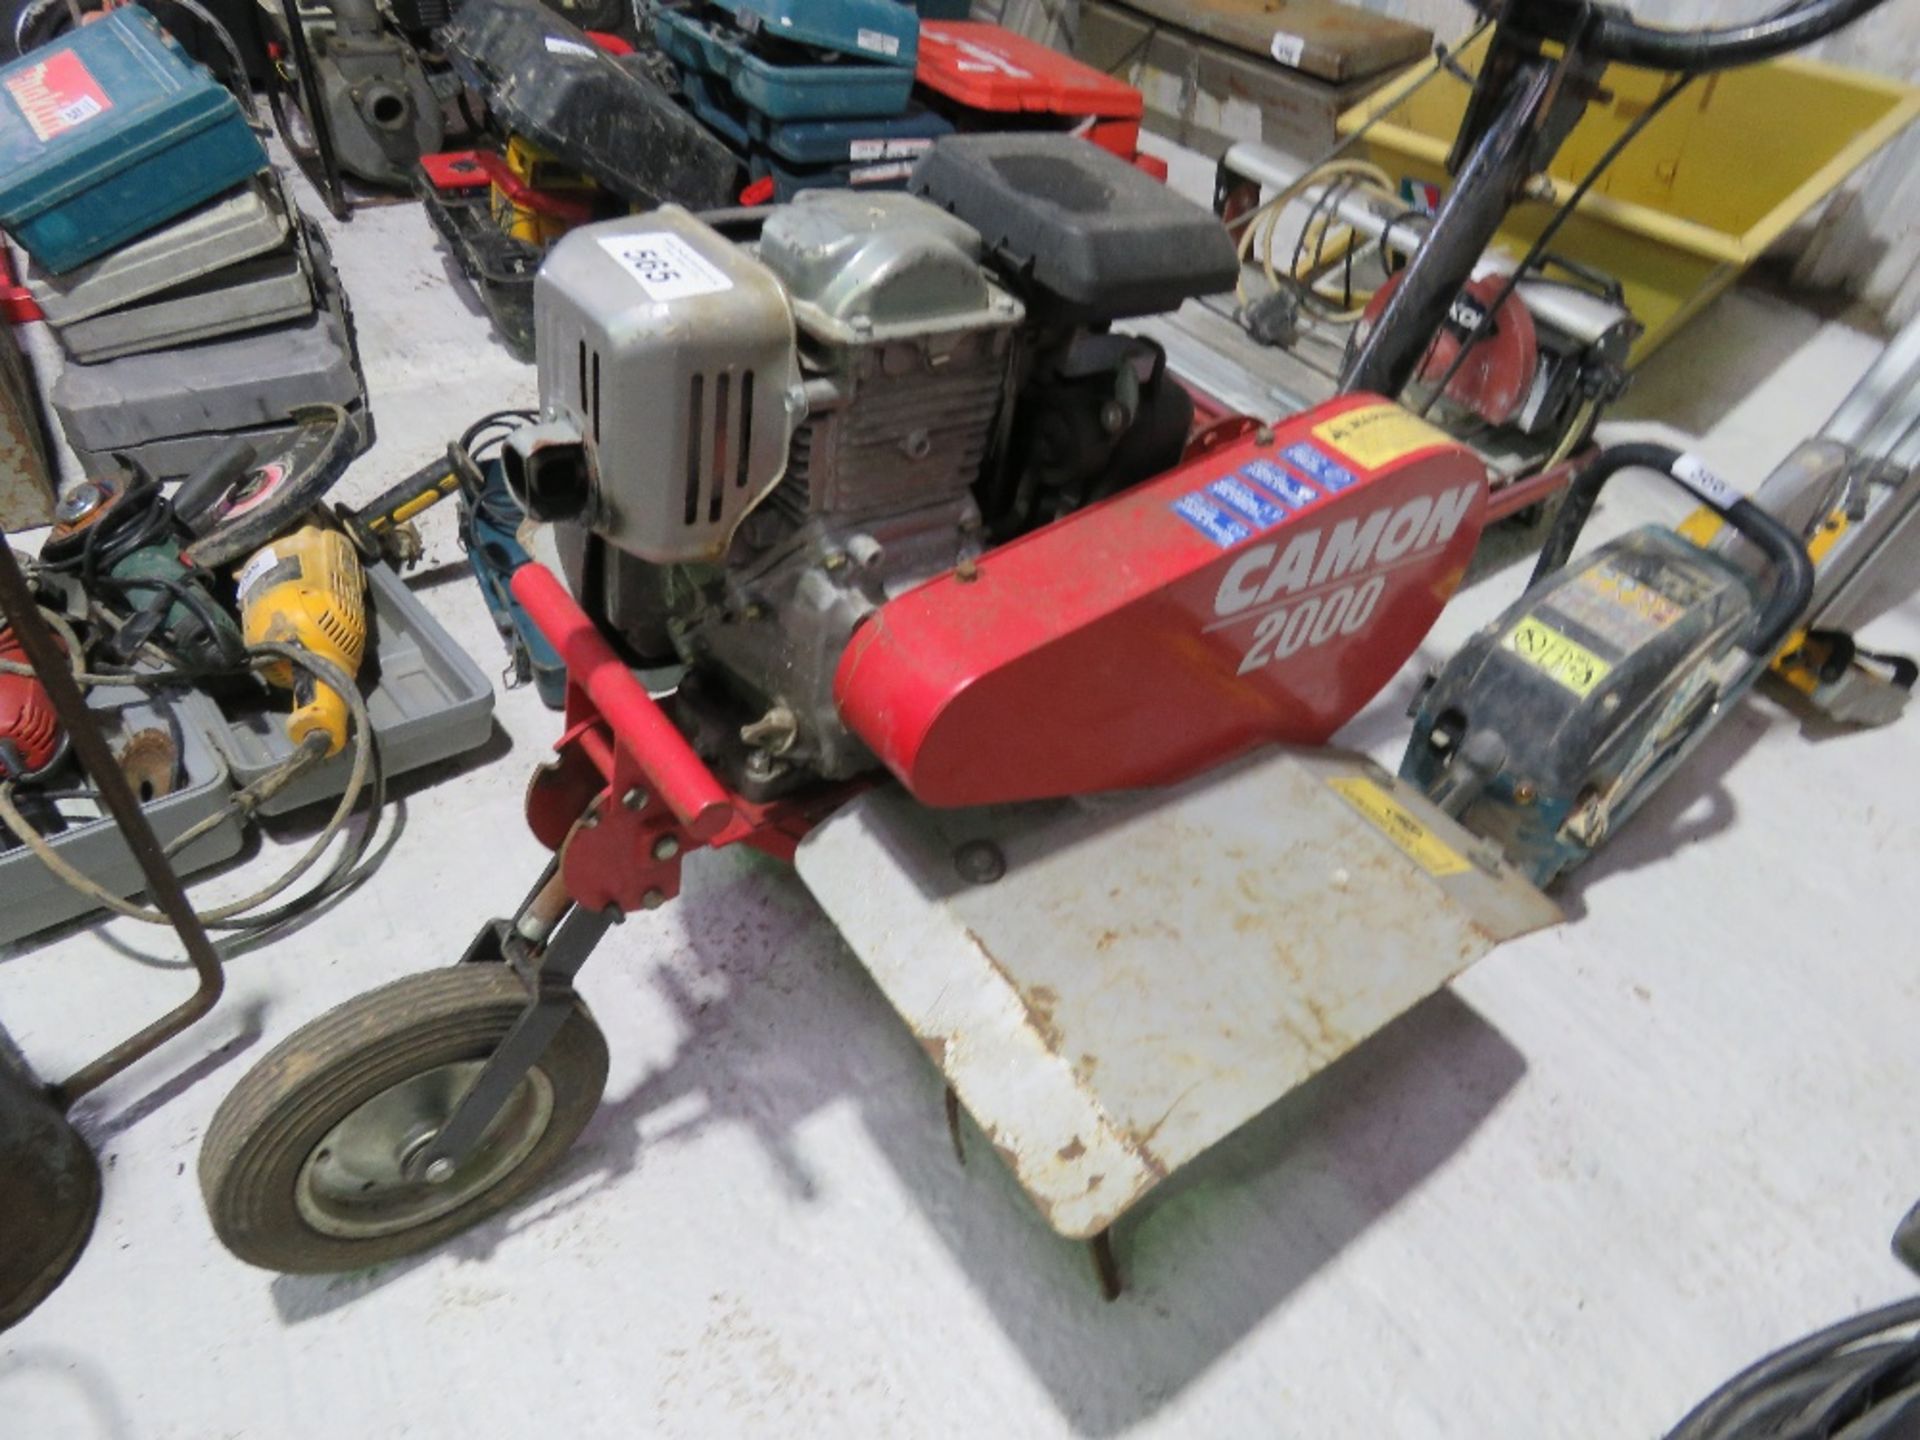 TRACMASTER 5HP HONDA ENGINE ROTORVATOR. DIRECT FROM LOCAL RETIRING BUILDER. THIS LOT IS SOLD UN - Image 4 of 8